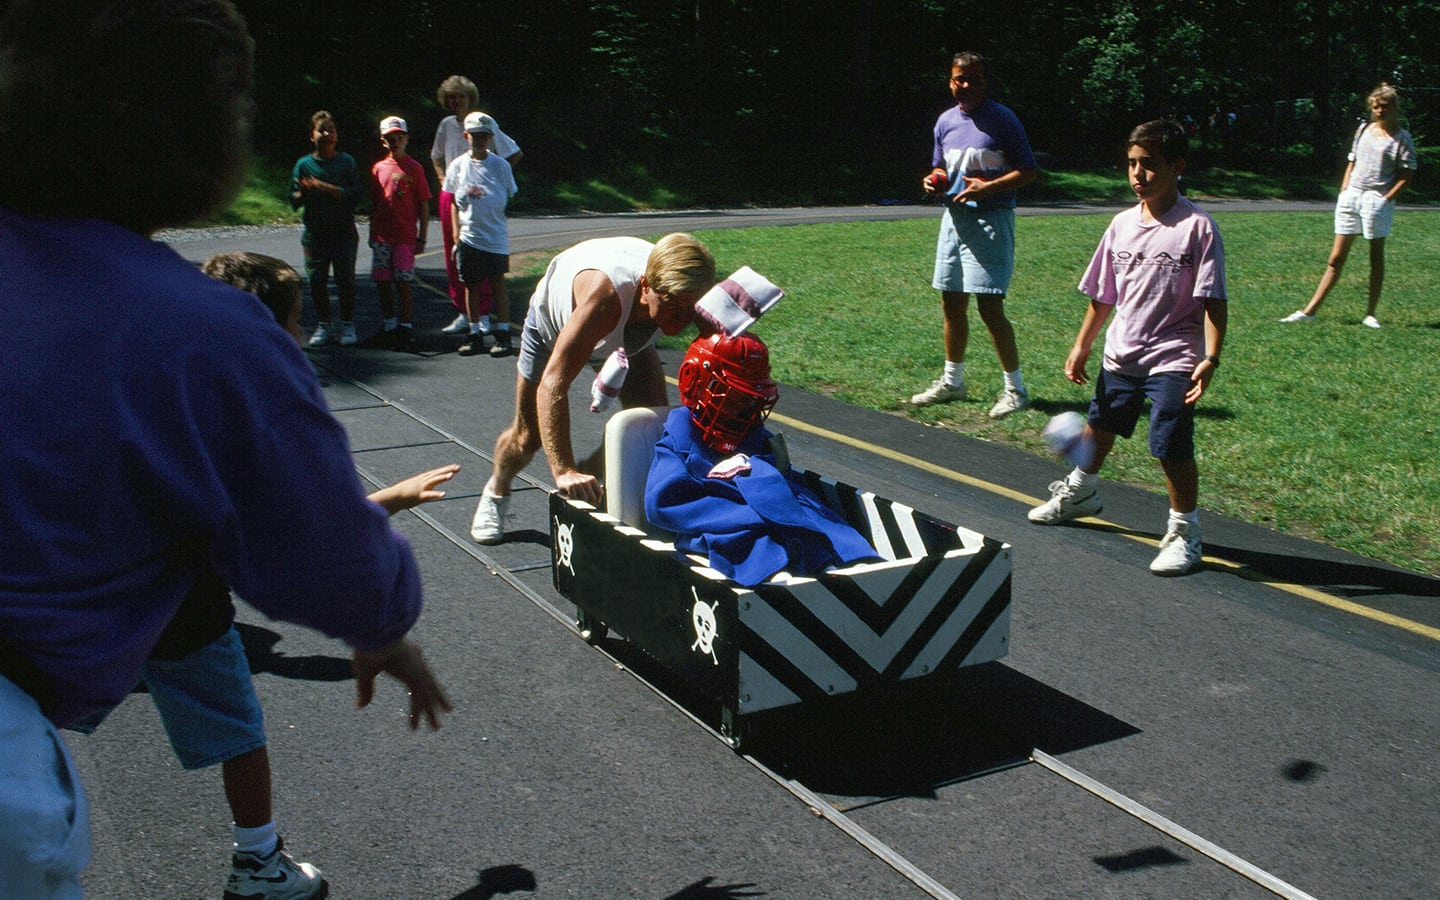 Olympic game. Person in a cart getting pushed by a team member.